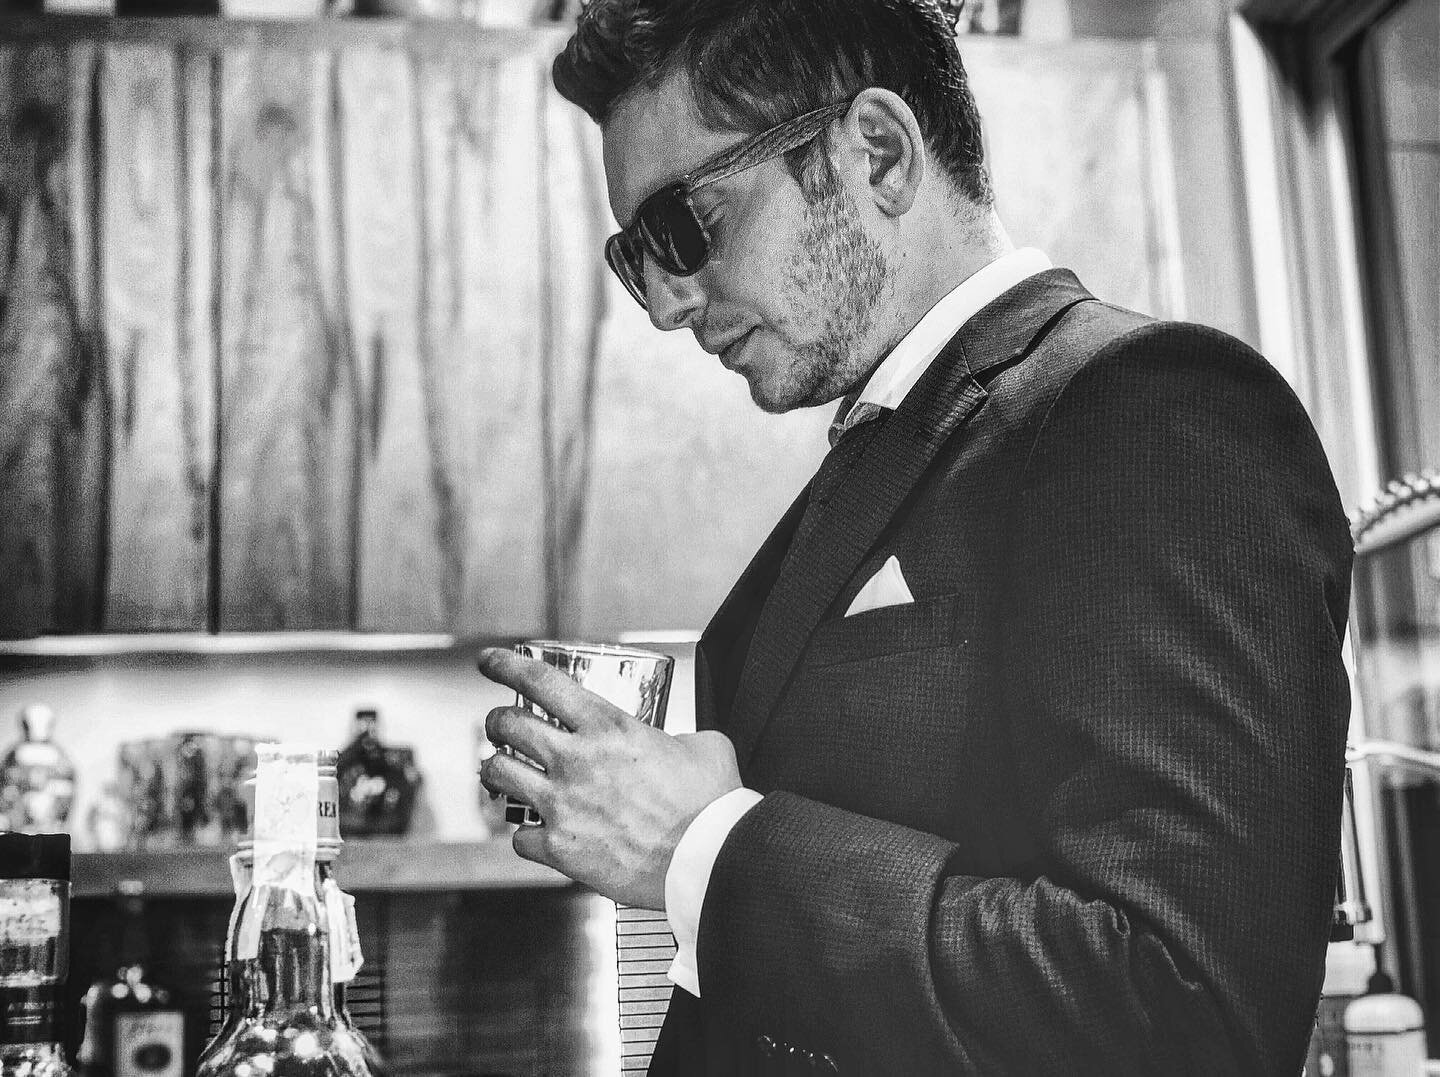 &ldquo;2am, they ran out of lemonade so I shot that vodka straight anyway..&rdquo; - @postmalone 
.
.
.
.
.
.
.
#likeitwasfunny #vodka #suitup #bw #photooftheday #enoughisenough #shades #instagood #satown #pizza